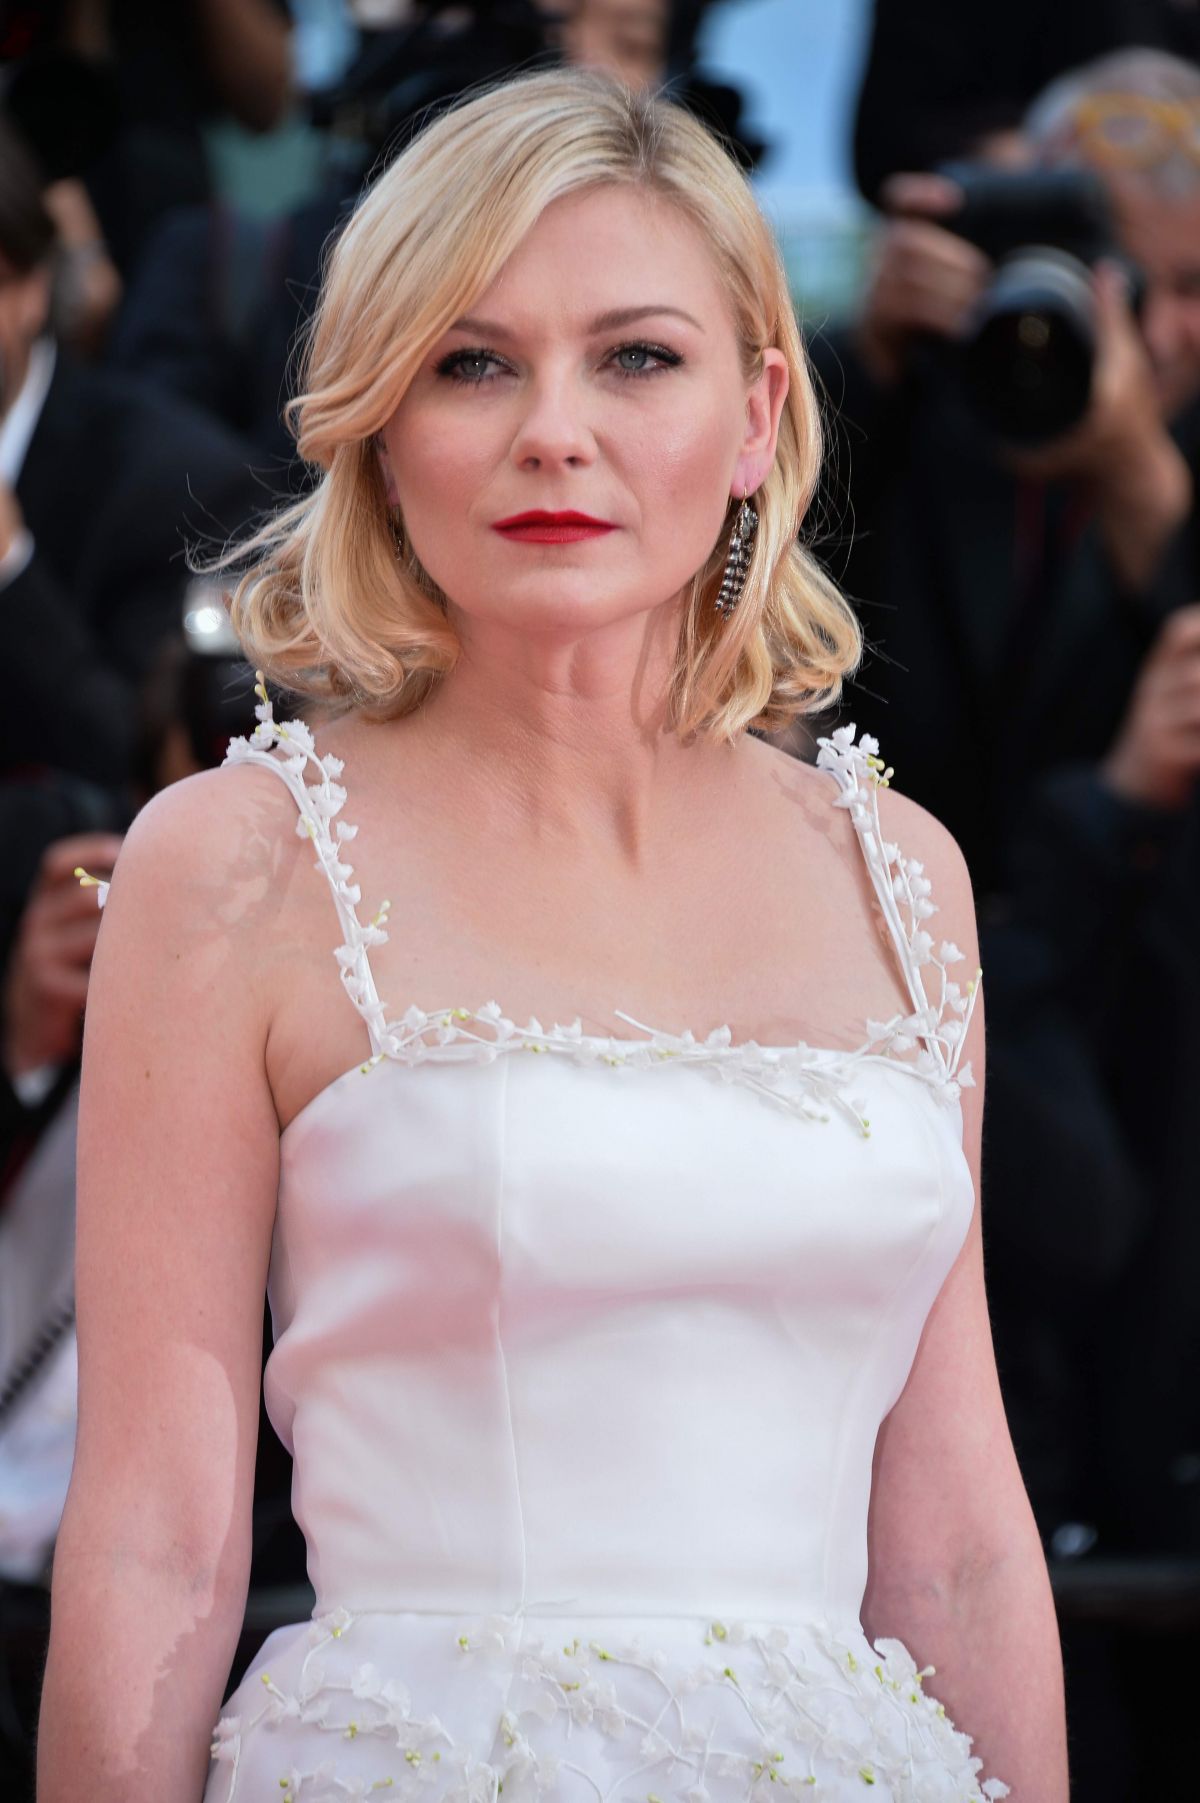 KIRSTEN DUNST at “The Loving’ Premiere at 69th Annual Cannes Film